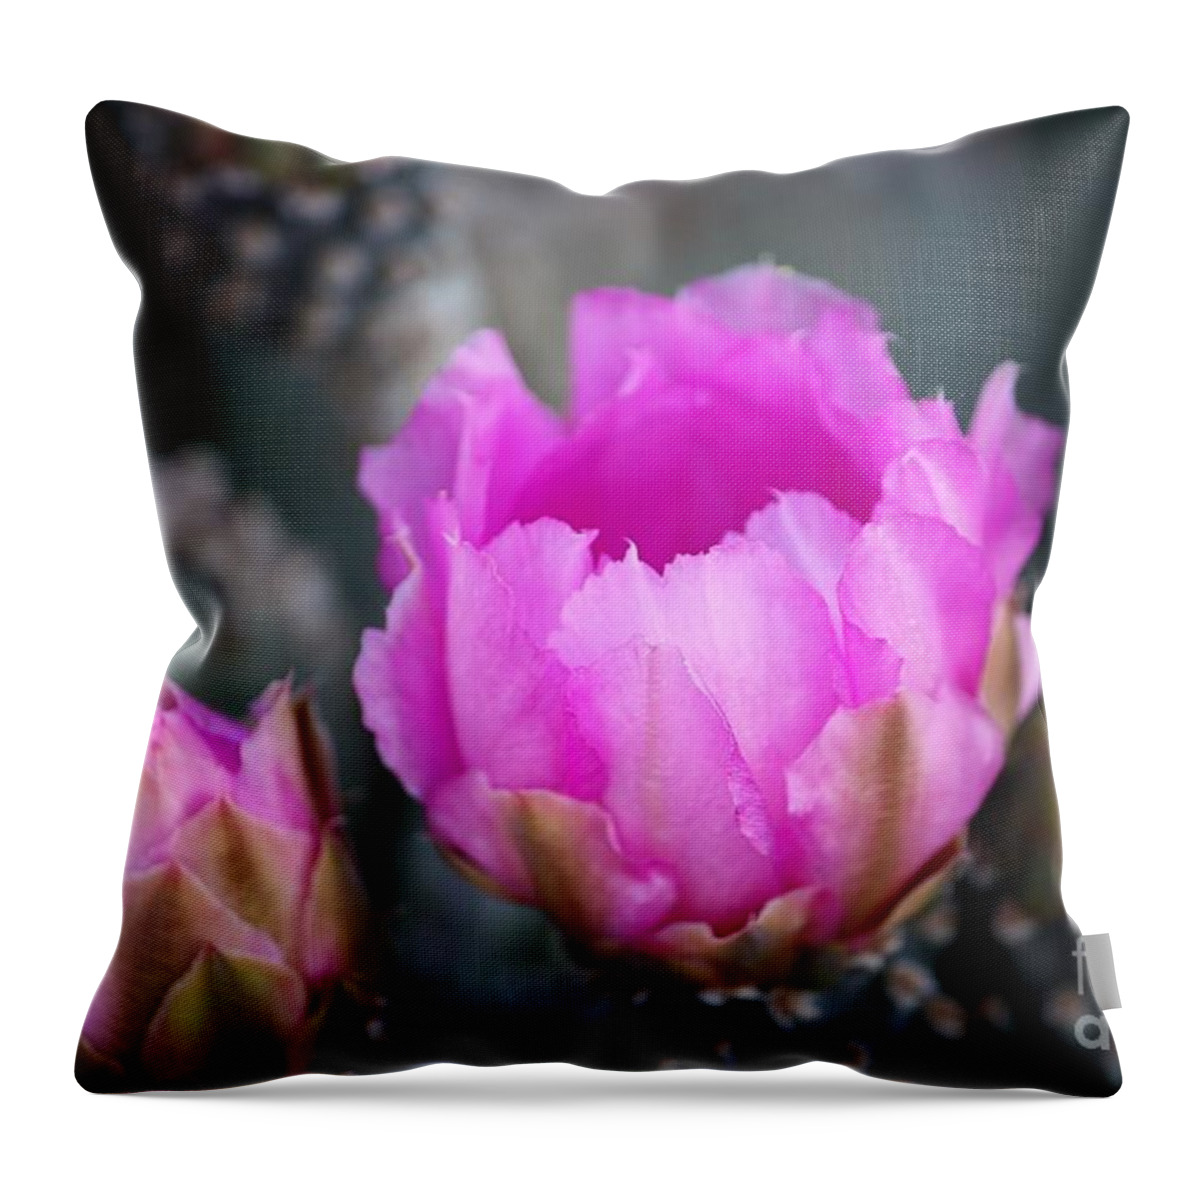 Cactus Throw Pillow featuring the photograph Waking by Marcia Breznay